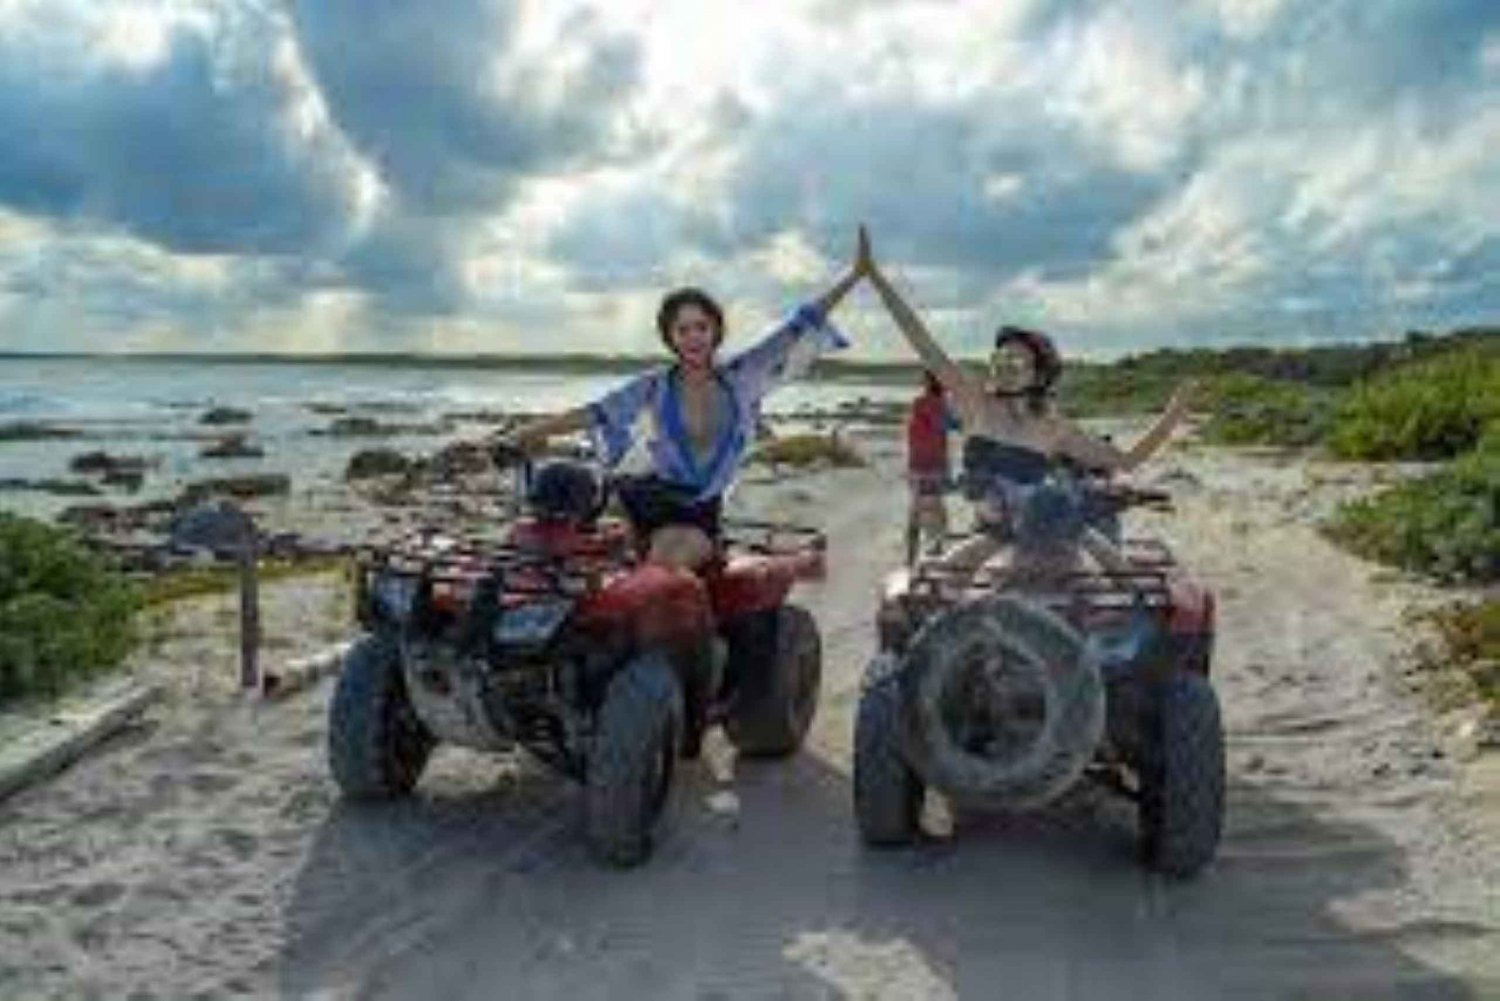 Nas: Atv guided tours best beaches and historical stops!